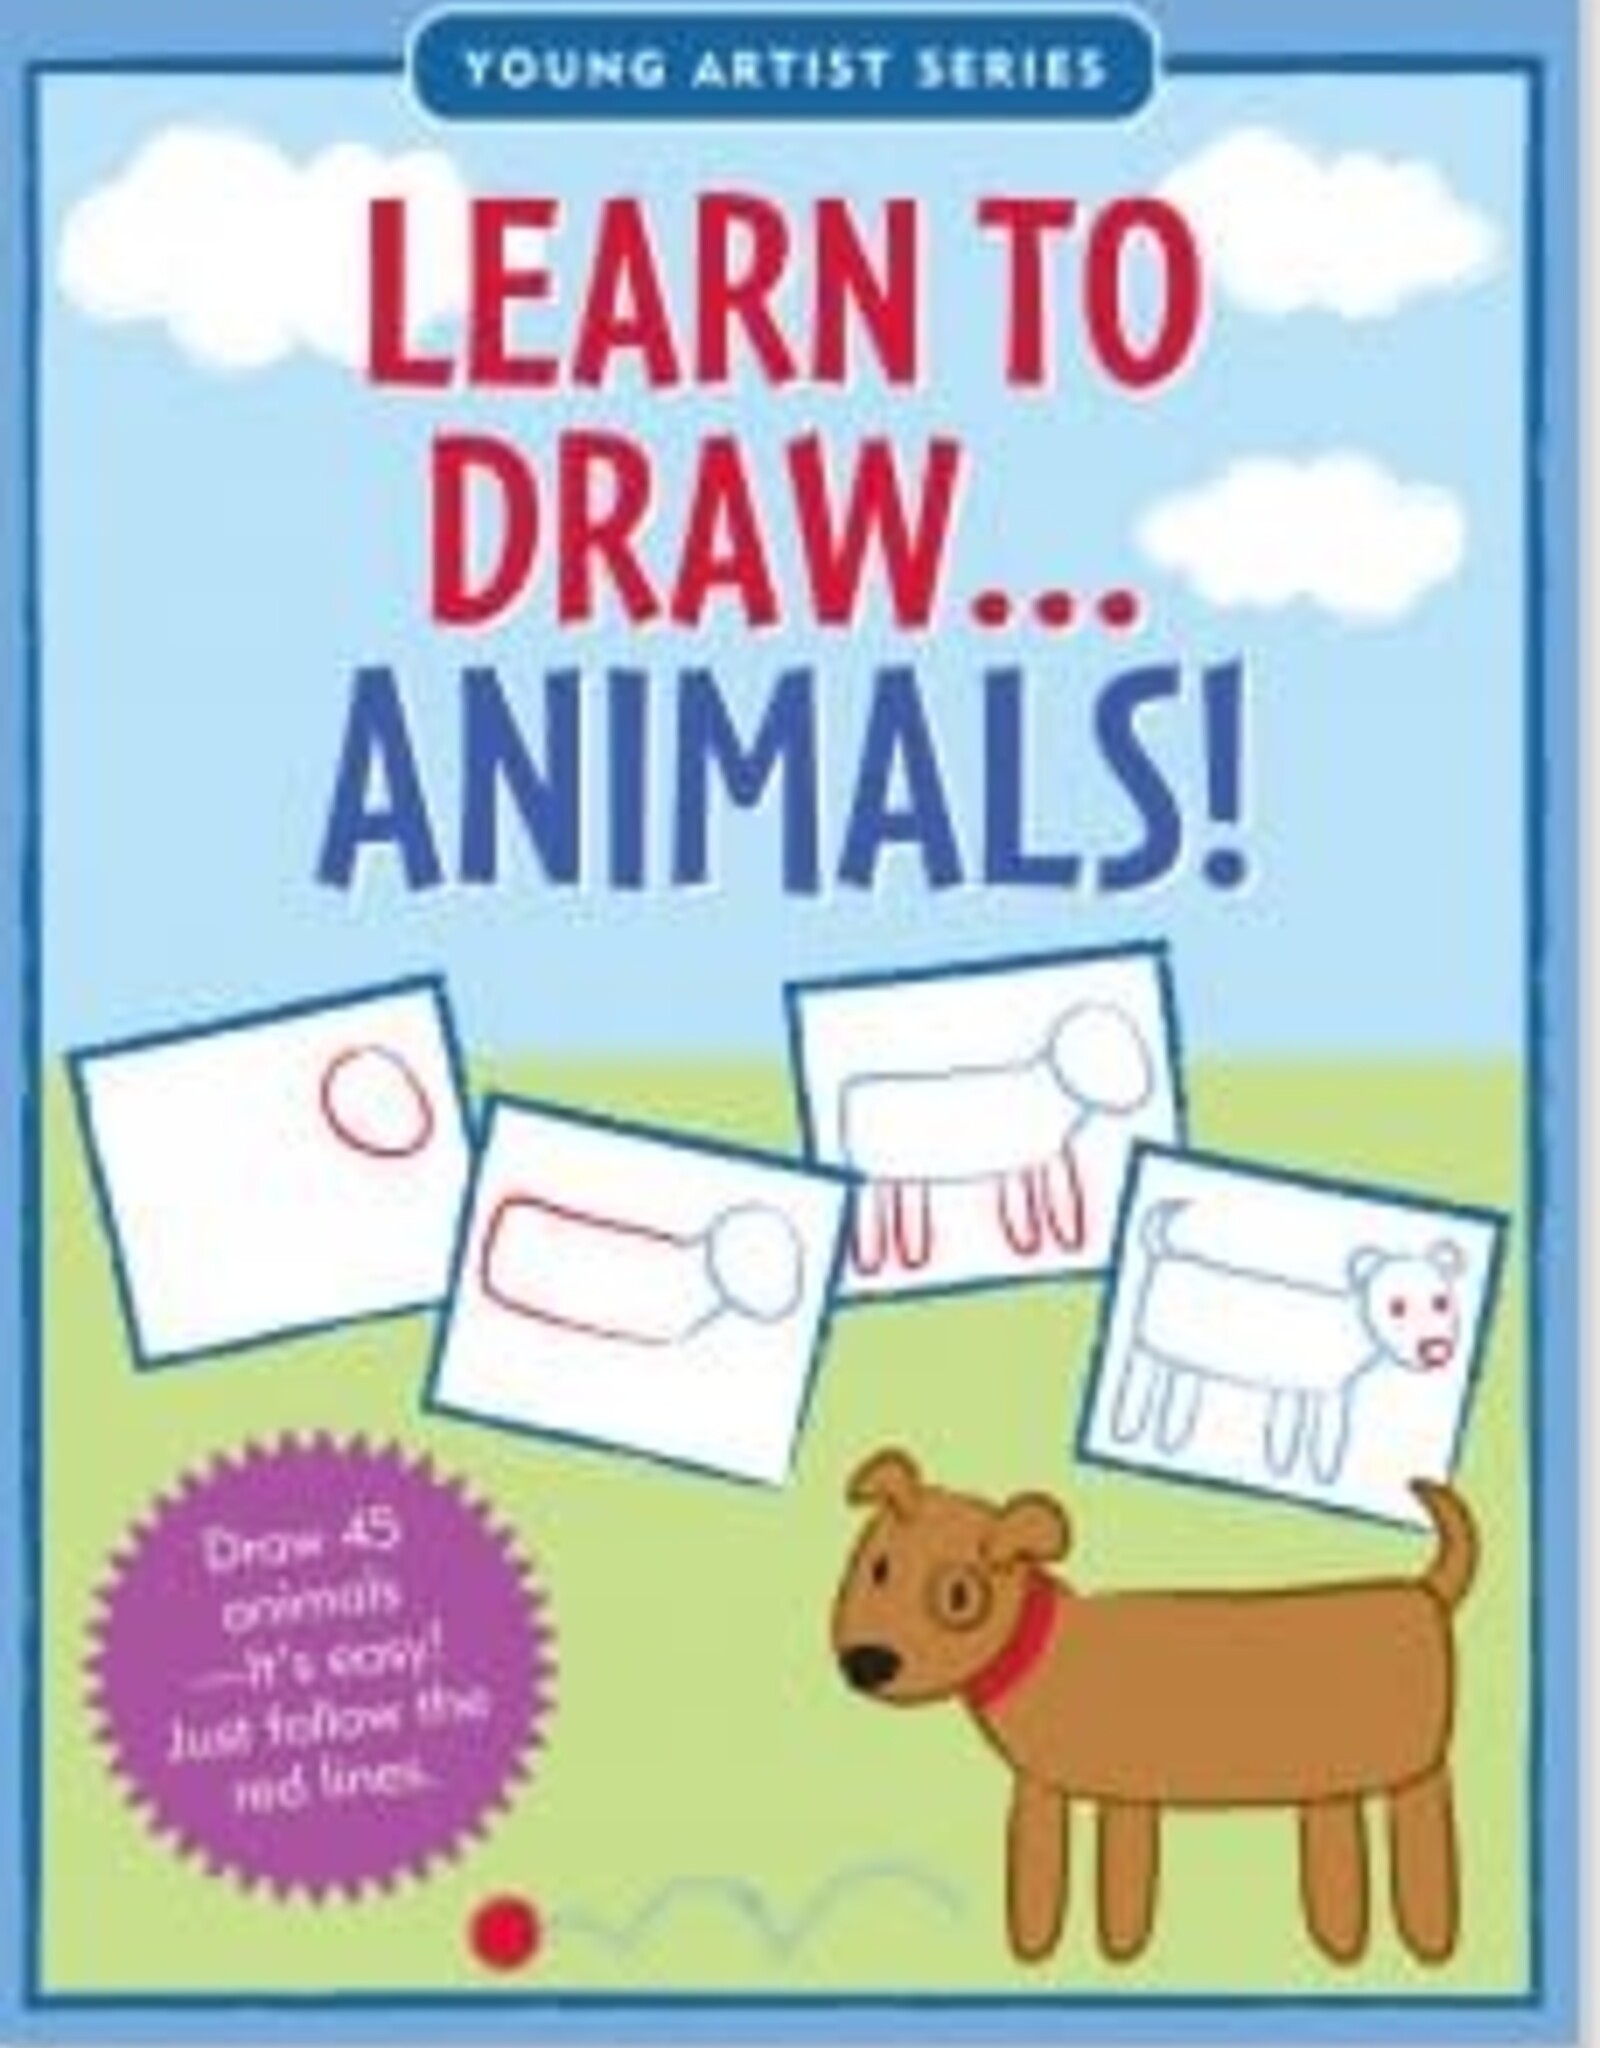 Peter Pauper Press Learn to Draw Animals